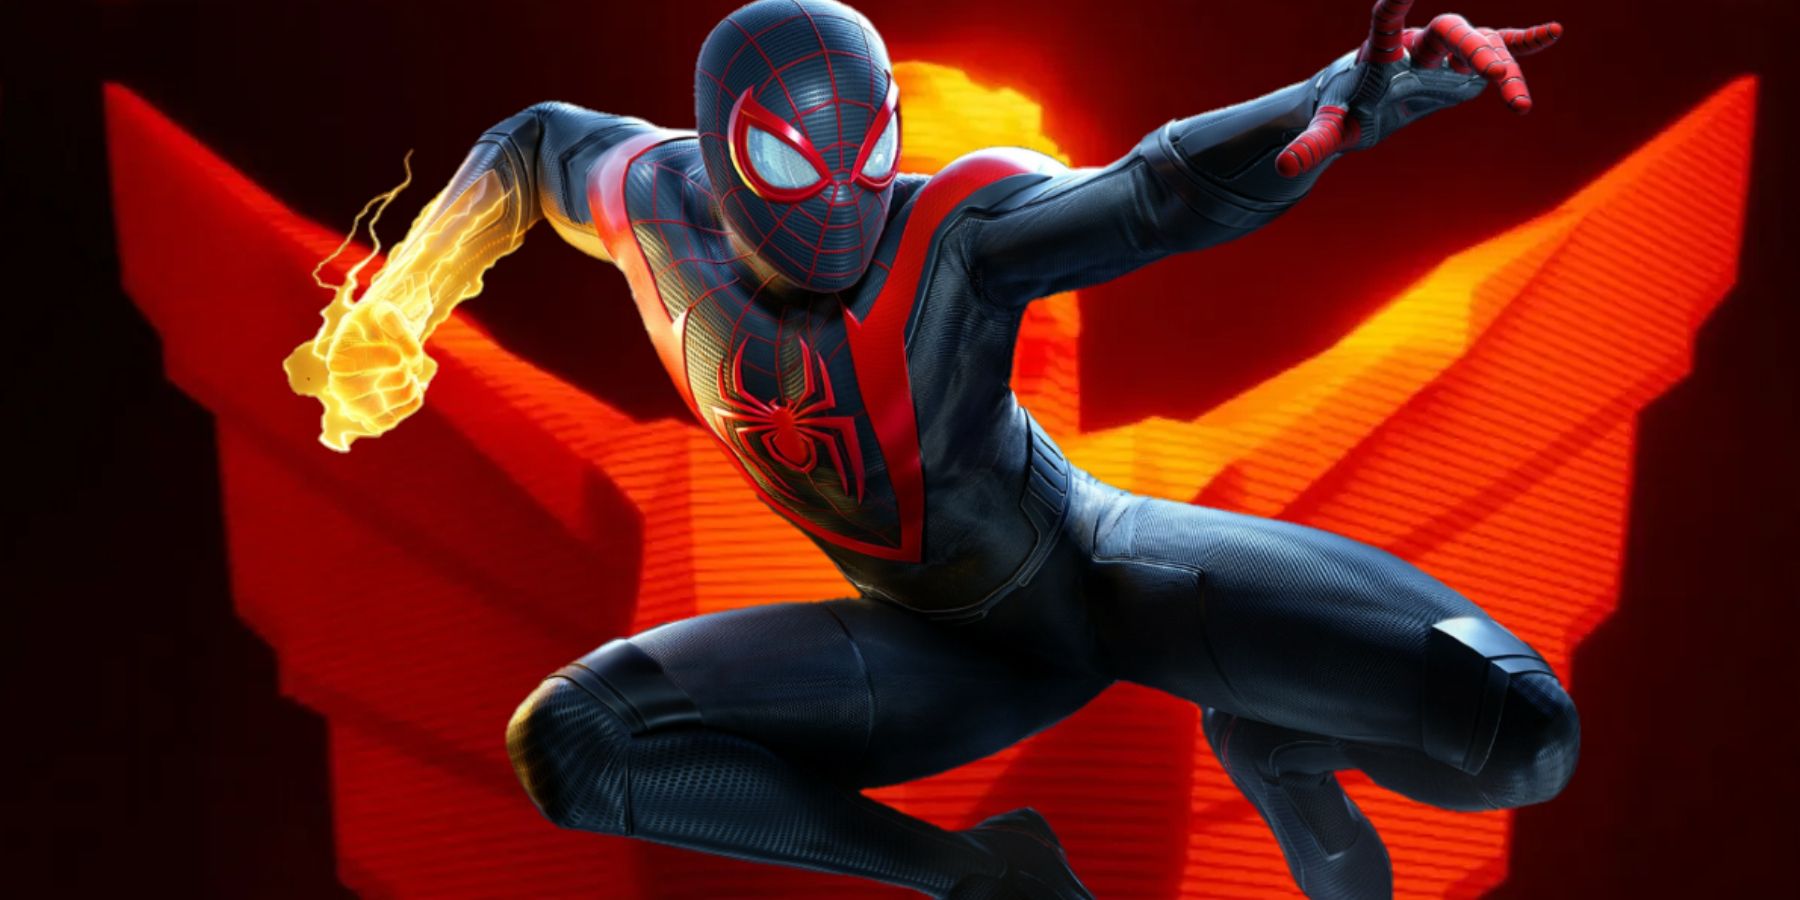 marvel's spider-man 2 game awards 2022 most anticipated game nominee snub